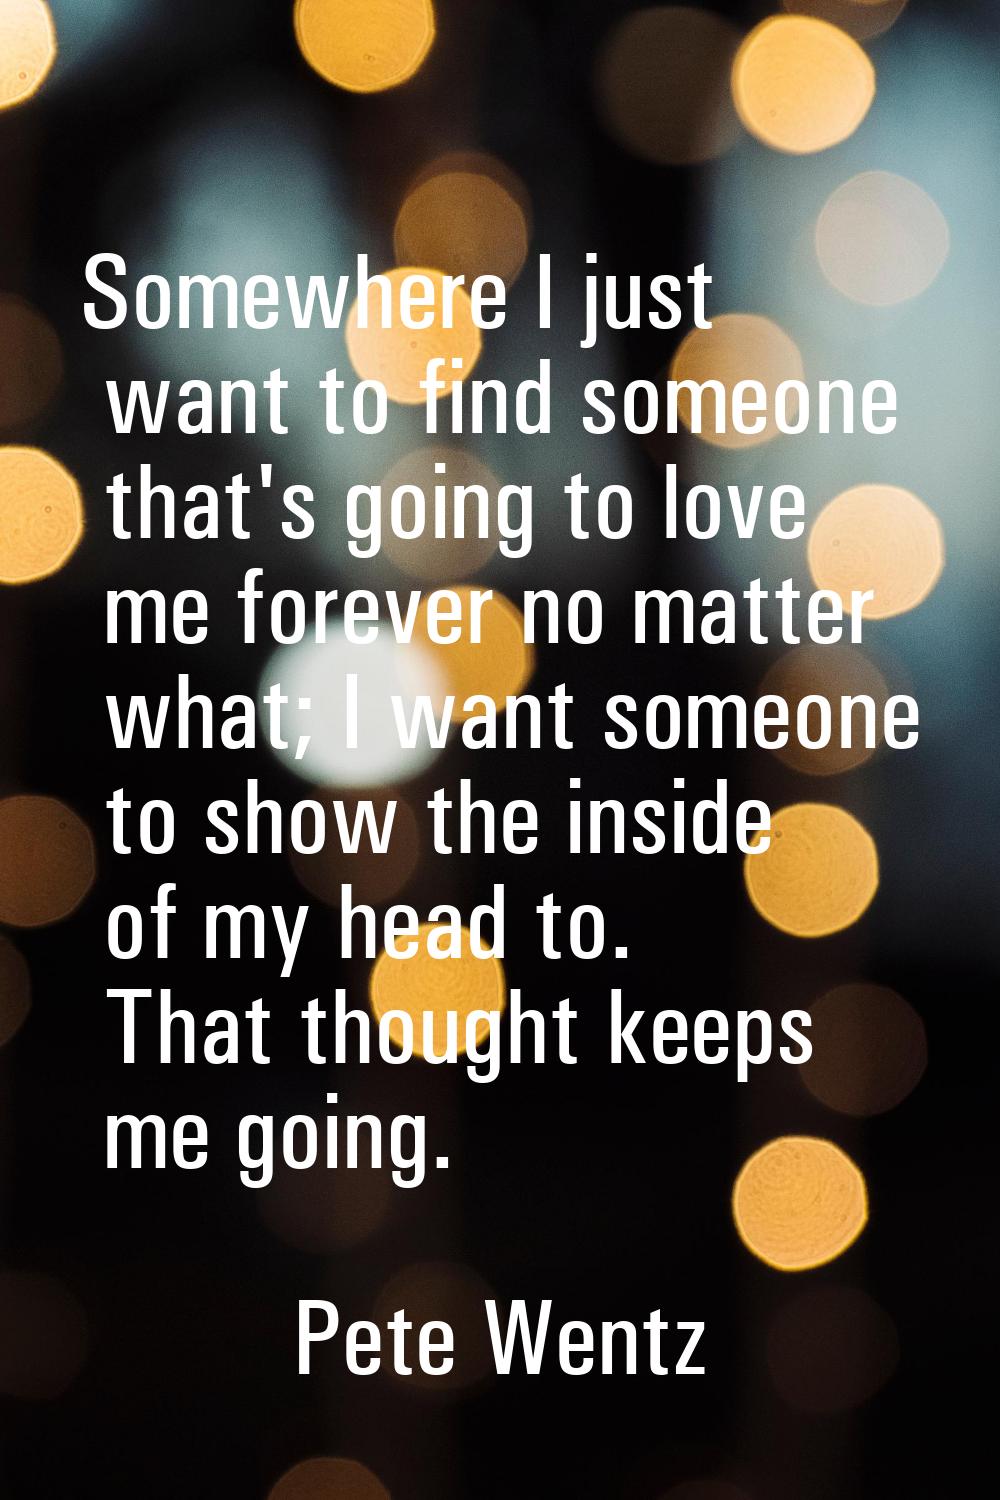 Somewhere I just want to find someone that's going to love me forever no matter what; I want someon